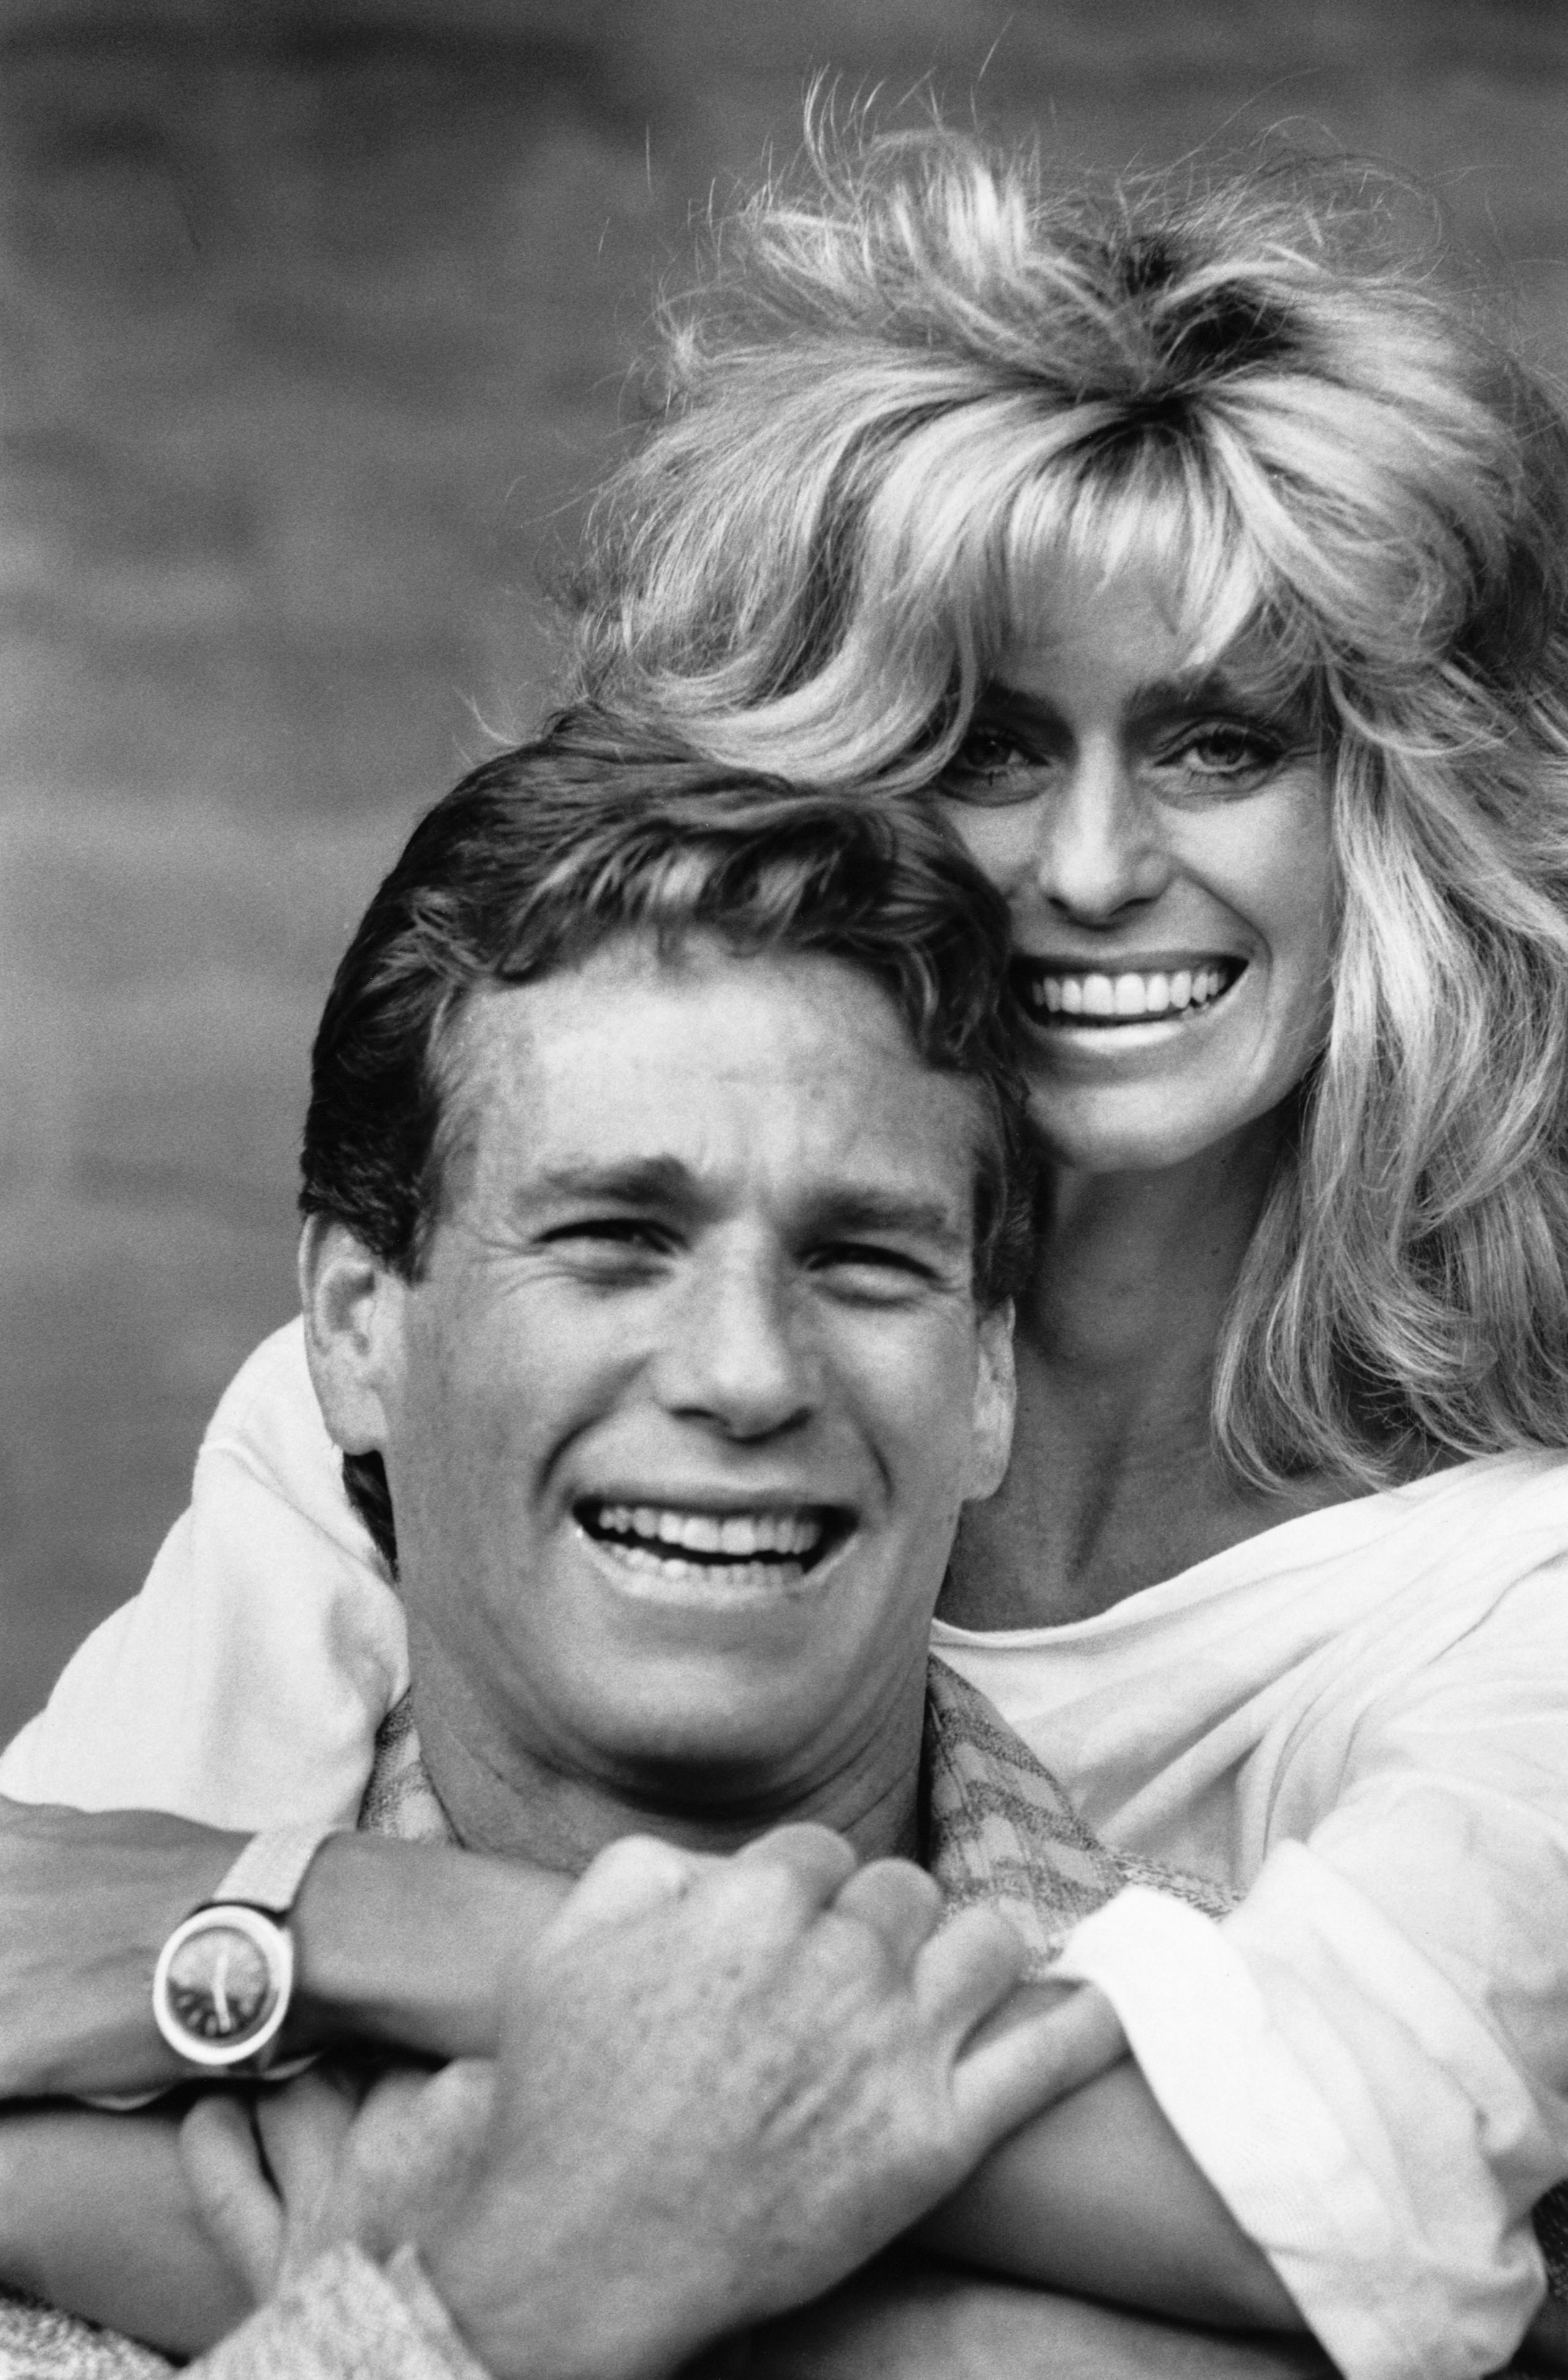 Ryan O'Neal and Farrah Fawcett photographed together in a black and white picture in 1984 | Source: Getty Images